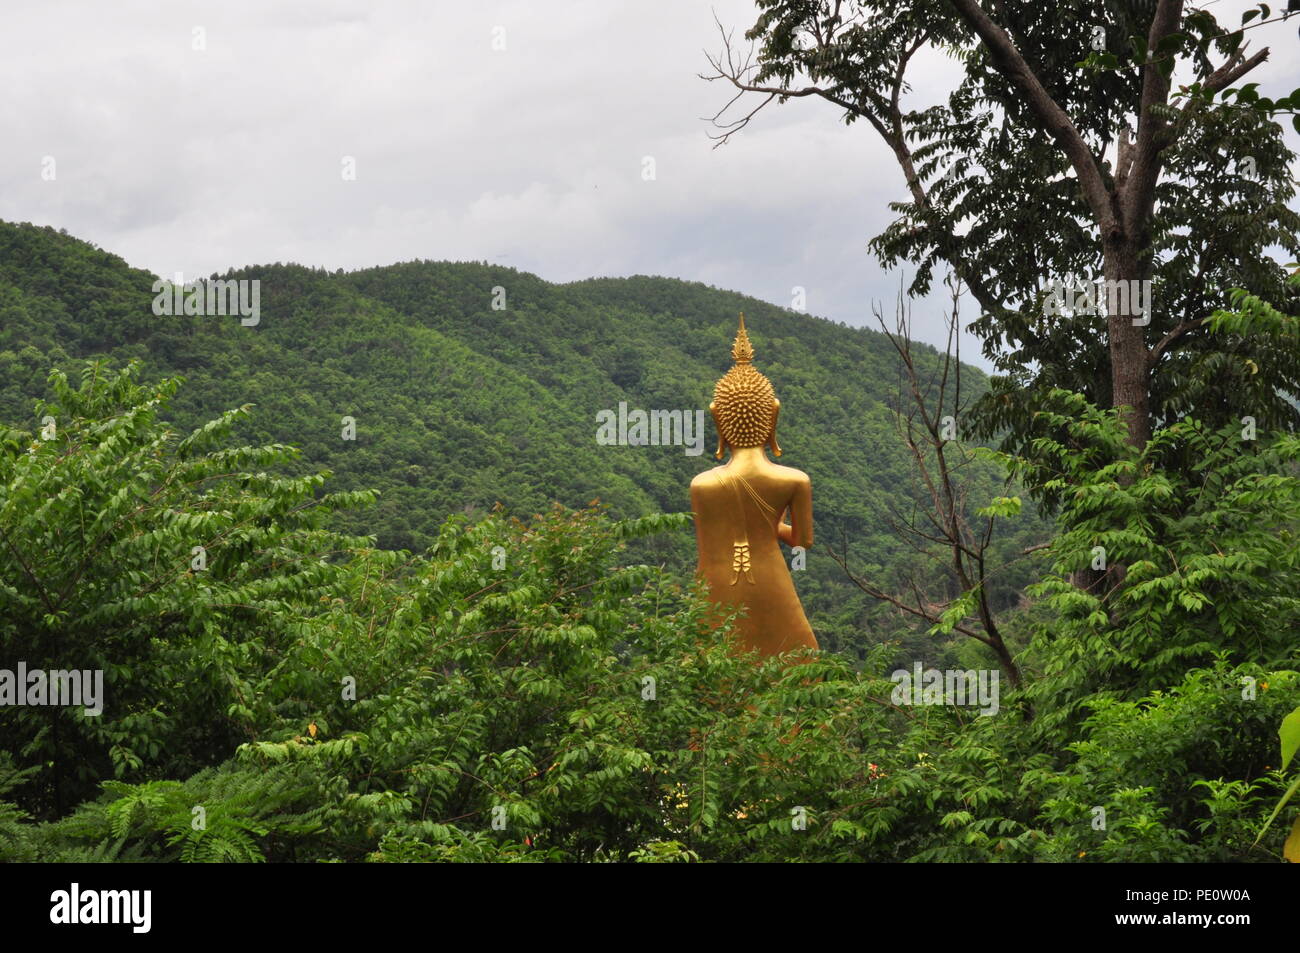 Buddha’s Greeting to the World, Wat Phra That In Khaen Temple, North Thailand, Mountains, Evergreen Trees, Nature Experience, Religious Experience Stock Photo